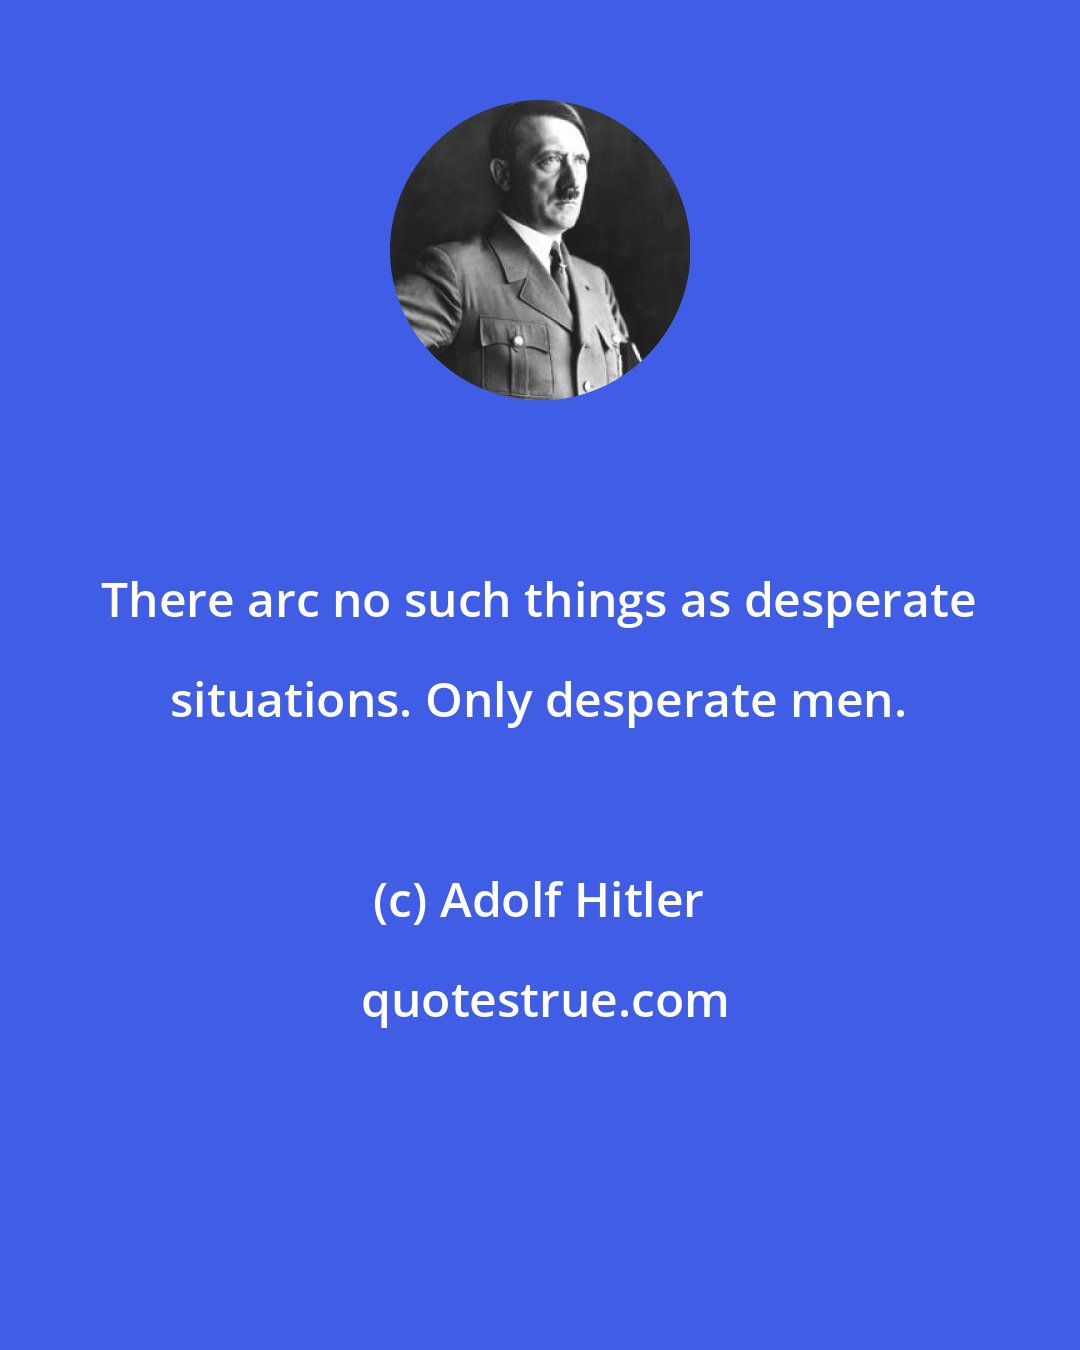 Adolf Hitler: There arc no such things as desperate situations. Only desperate men.